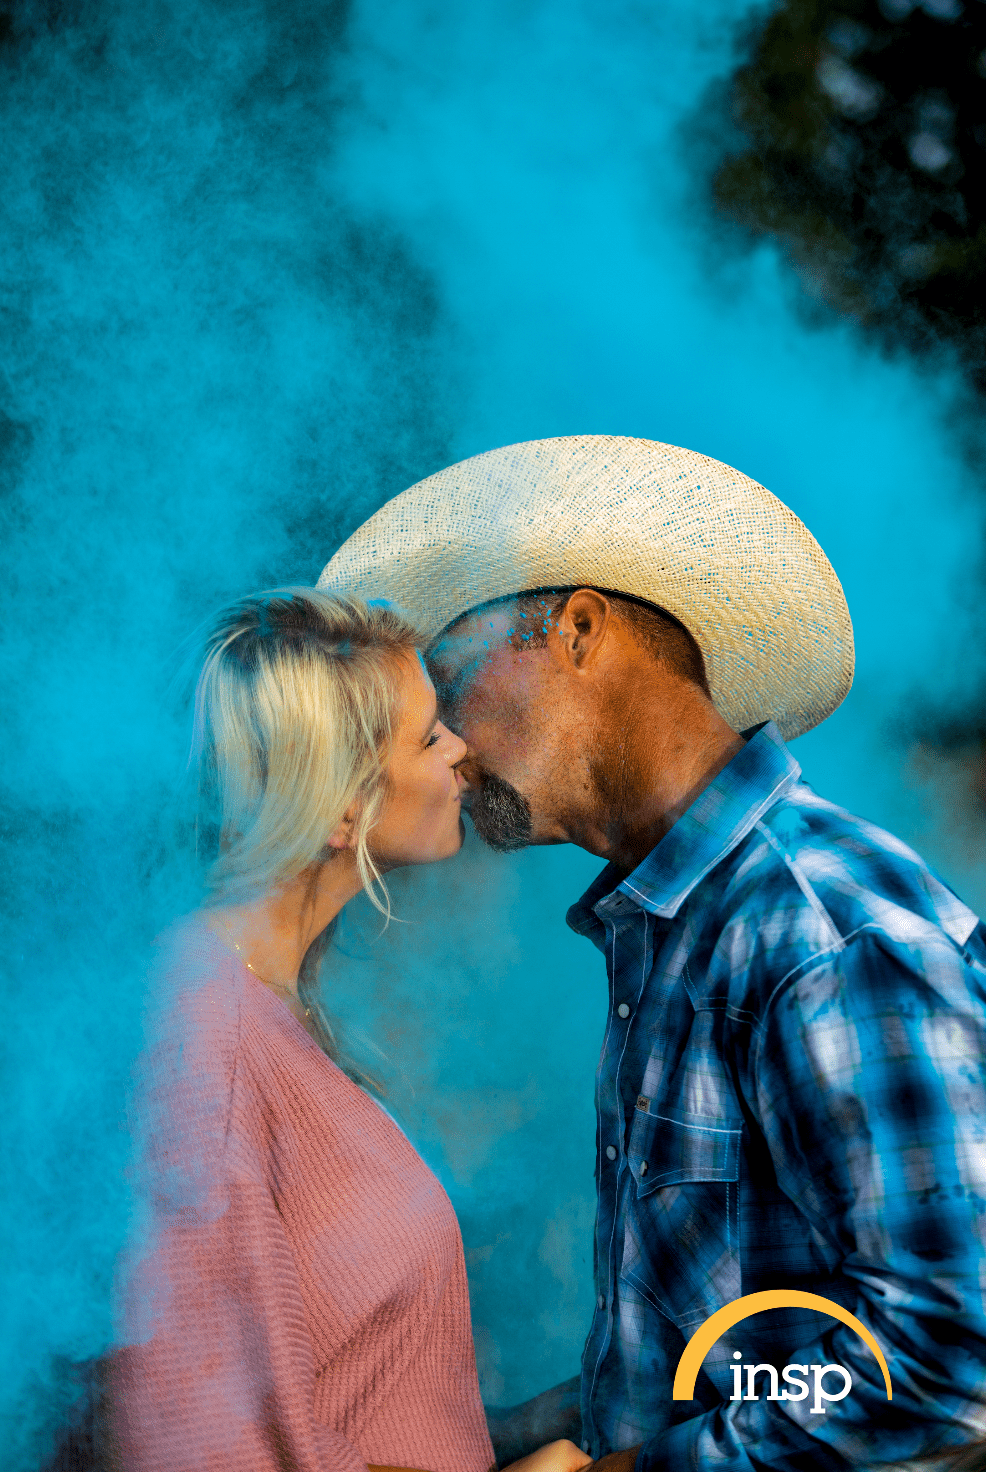 "The Cowboy Way" star Bubba Thompson and his wife Kaley kiss in a photograph. | Source: INSP